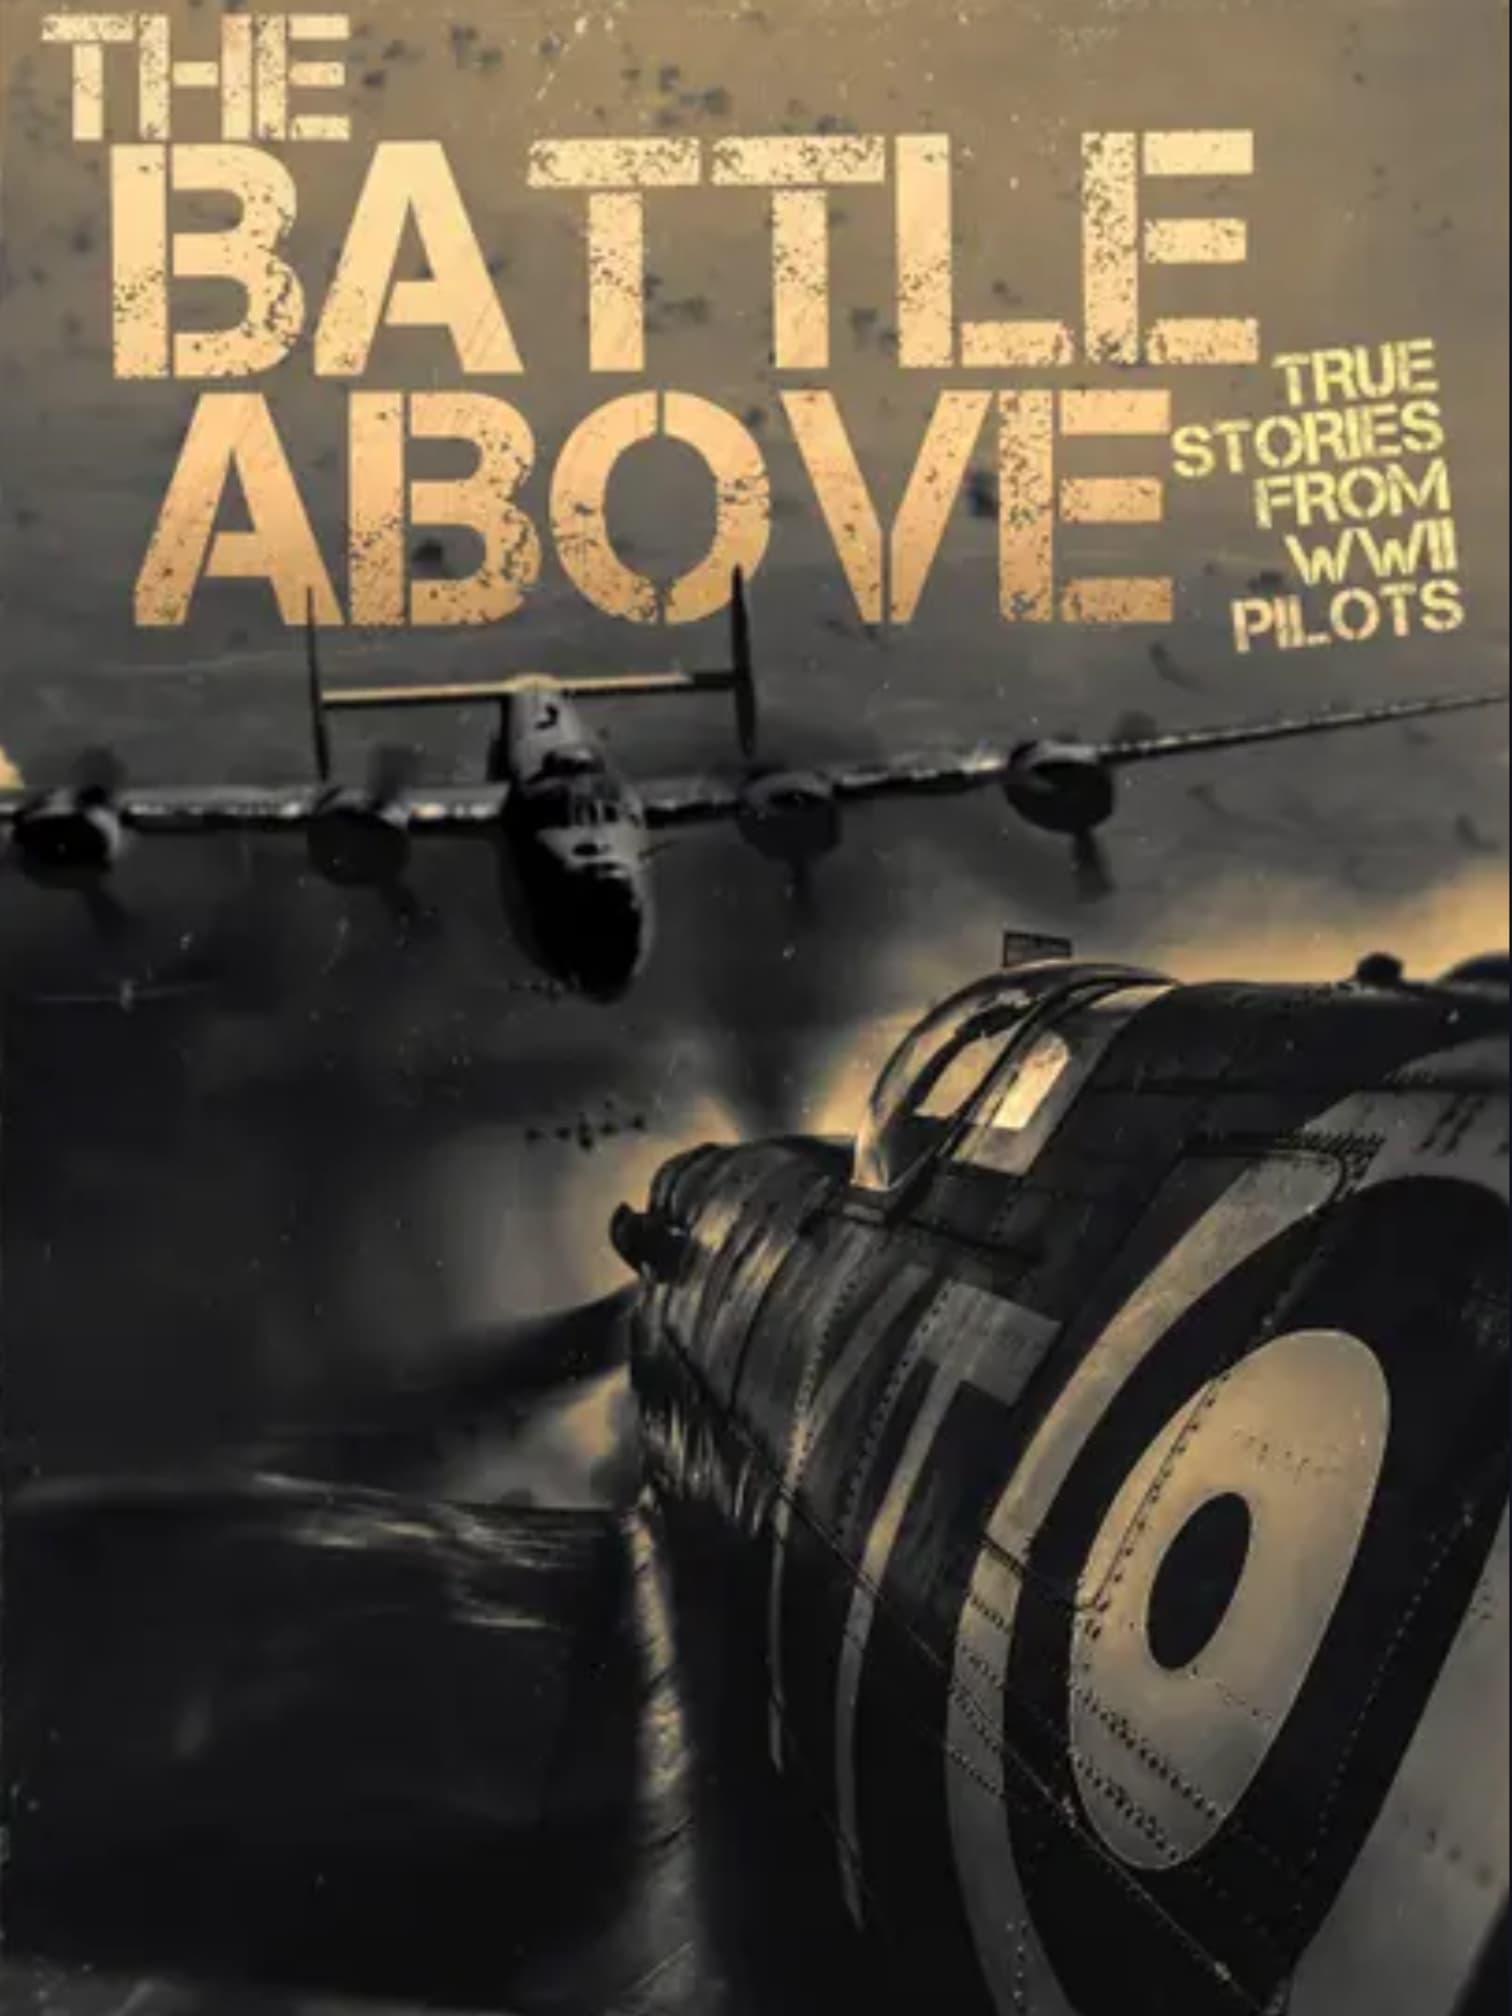 The Battle Above: True Stories From WWII Pilots